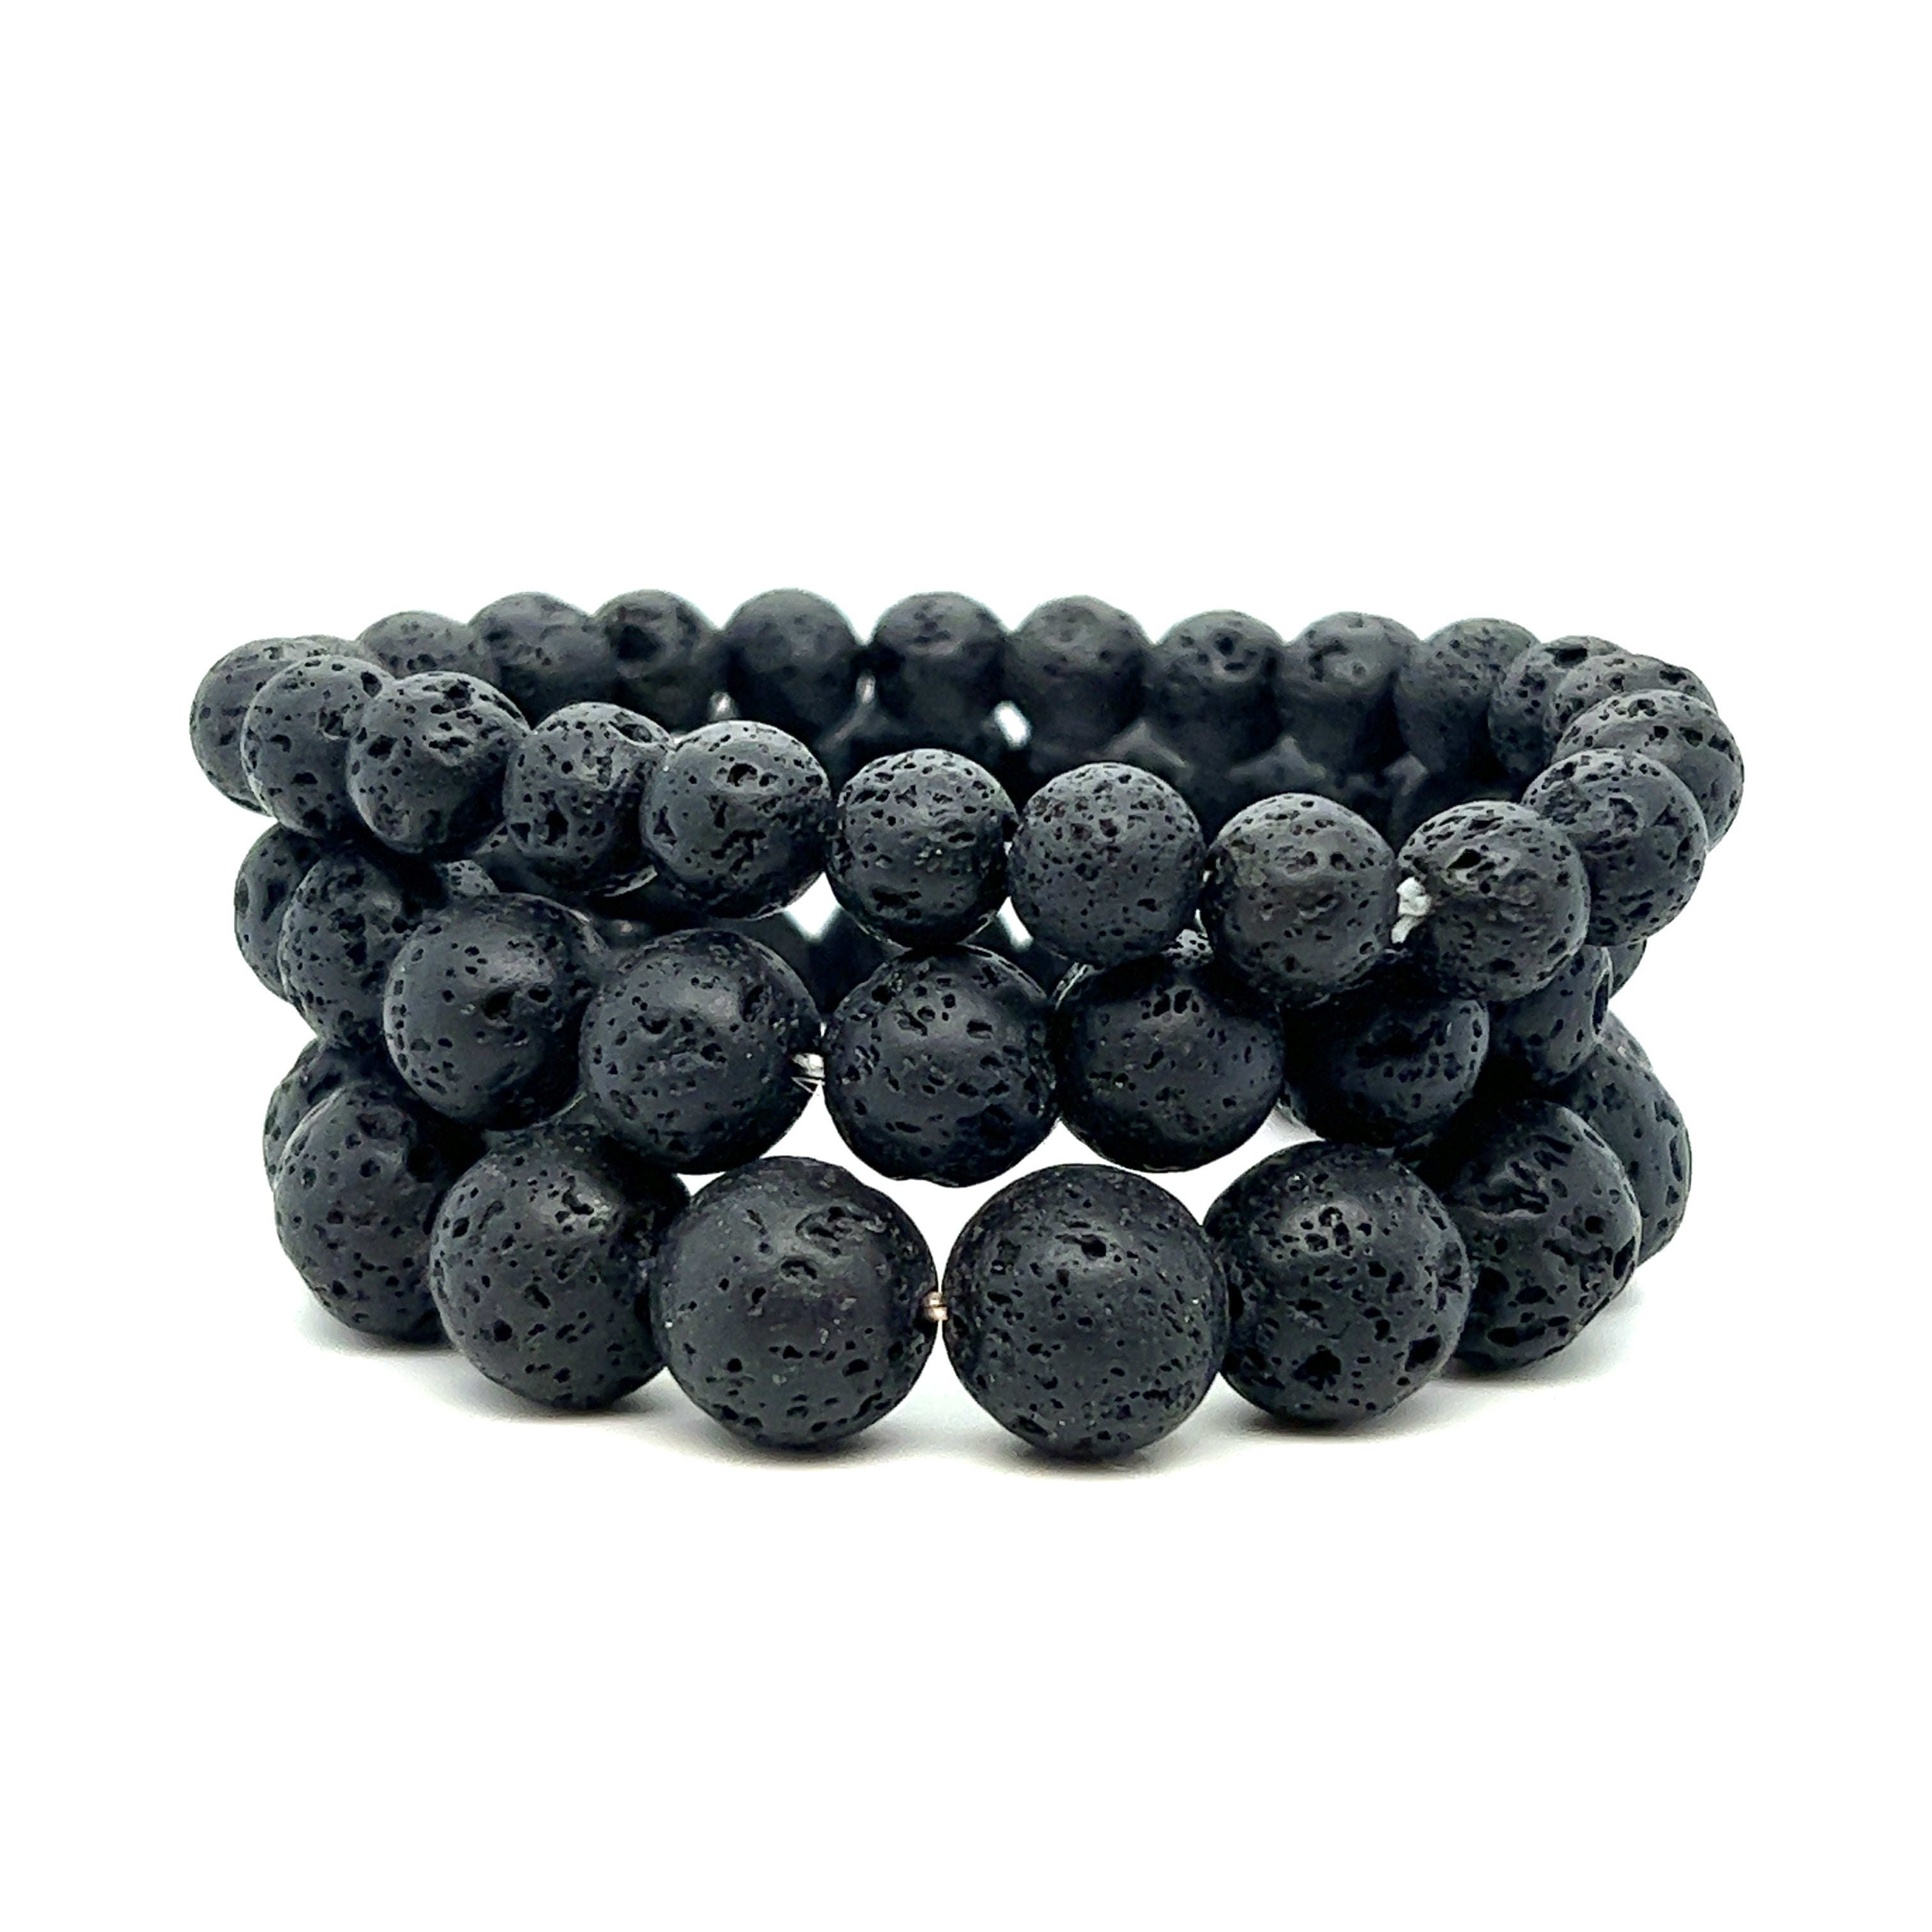 Essential Oil Bracelet with Lava Rock Beads